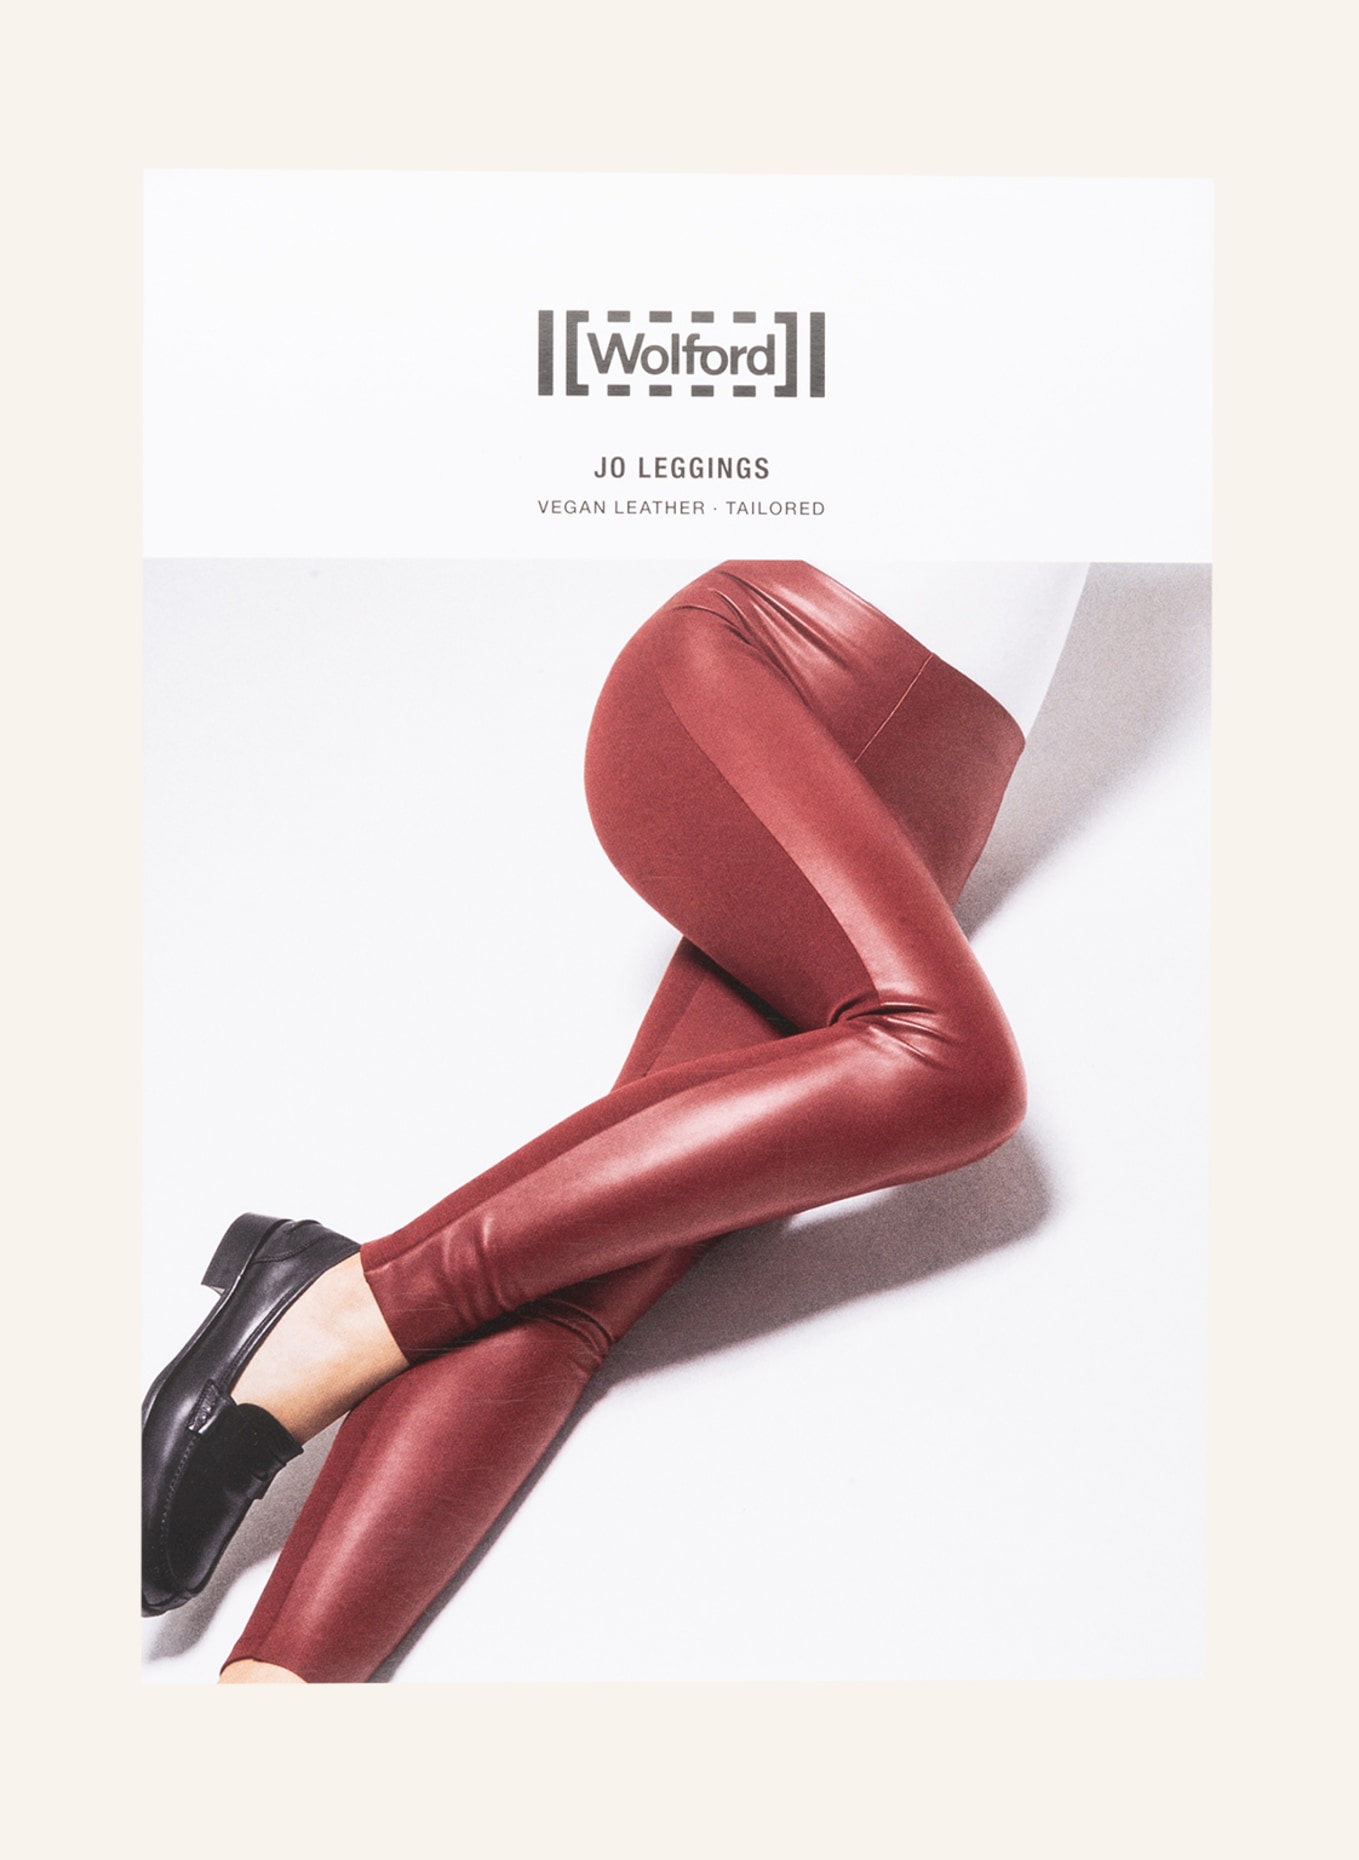 Wolford Leggings JO in leather look, Color: BLACK (Image 3)